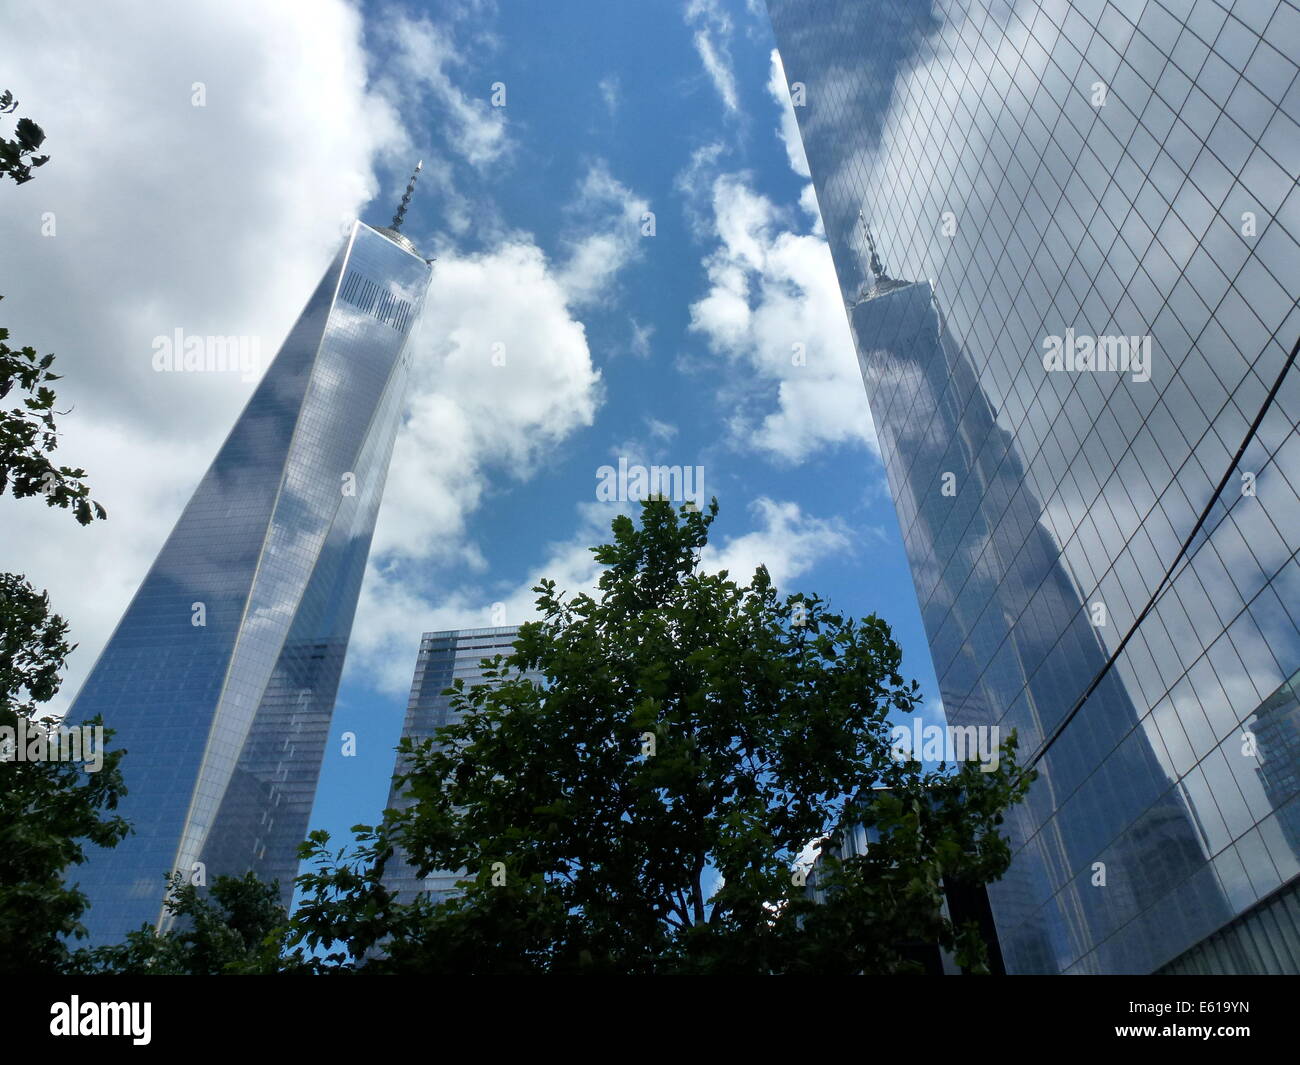 New York City, USA. 20th Aug, 2014. Clouds mirror on the facade of One World Trade Center (WTC 1) (L) office highrise, previously known as the Freedom Tower, in New York City, USA, 20 August 2014. The WTC 1 skyscraper was constructed on the site also known as Ground Zero, which saw the destruction of the World Trade Center in the terrorist attack on 11 September 2001. The building which has been under construction since 2006 is the tallest highrise in the United States, measuring 541.3 metres. Photo: Alexandra Schuler/dpa/Alamy Live News Stock Photo